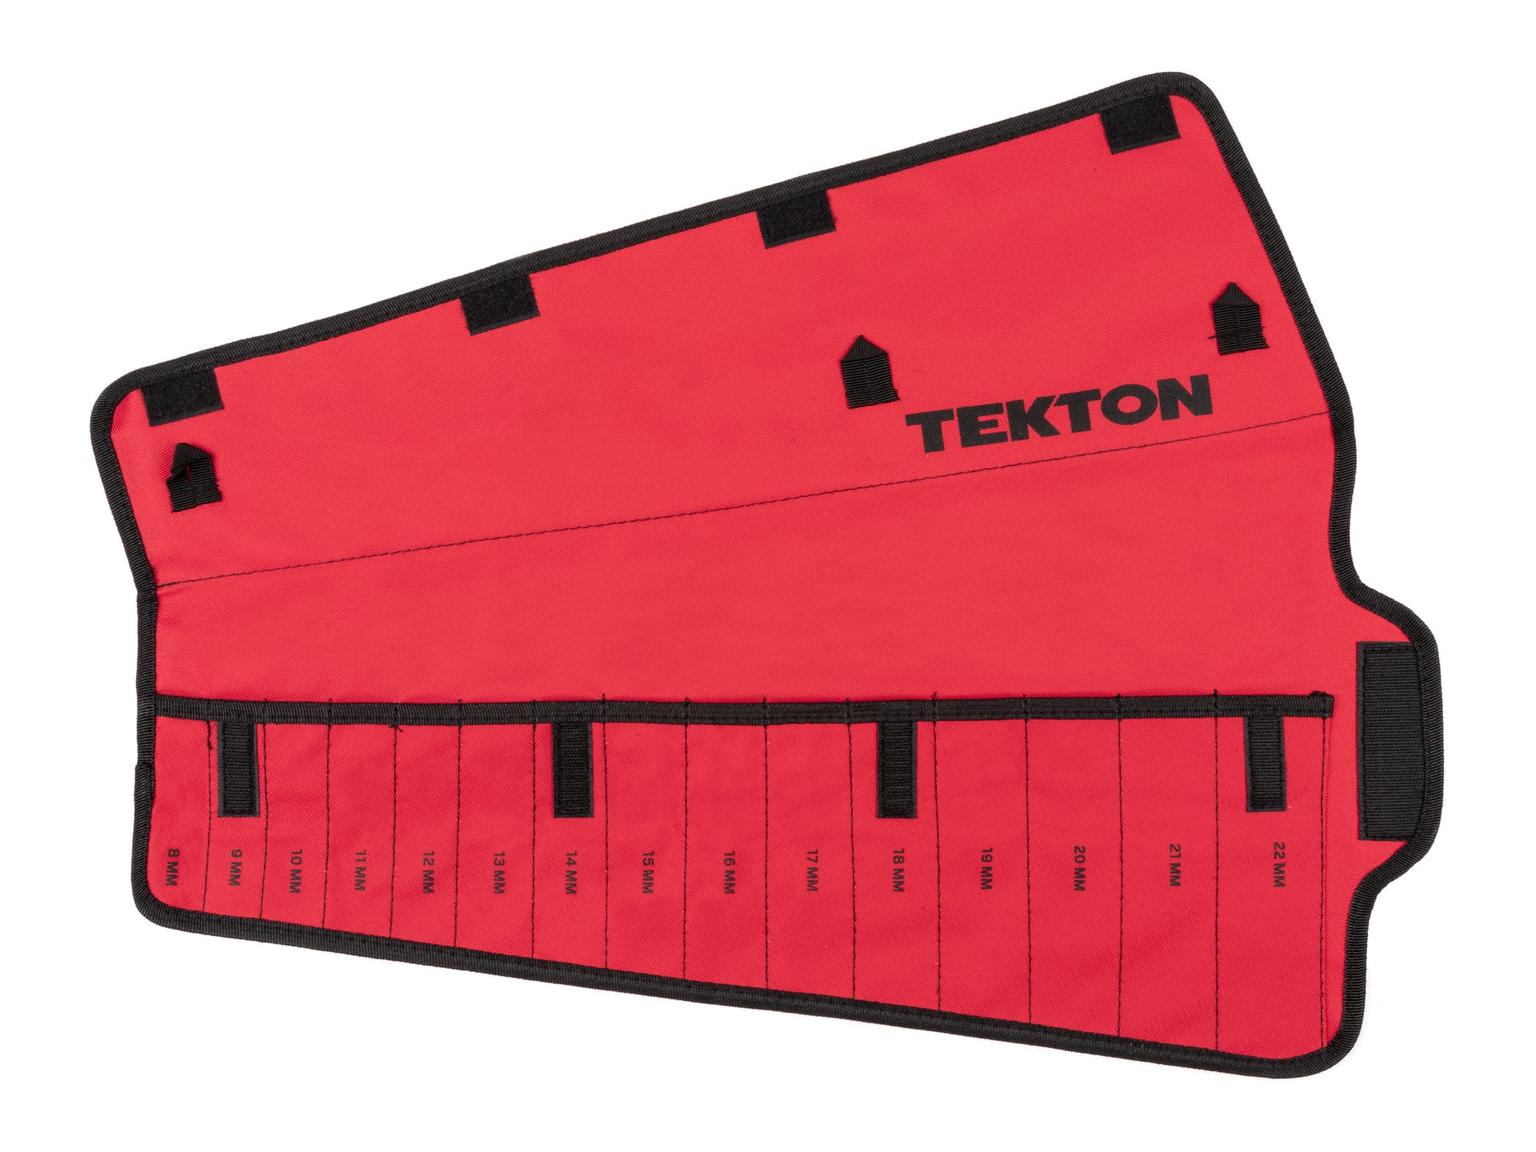 TEKTON ORG27415-T 15-Tool Combination Wrench Pouch (8-22 mm)